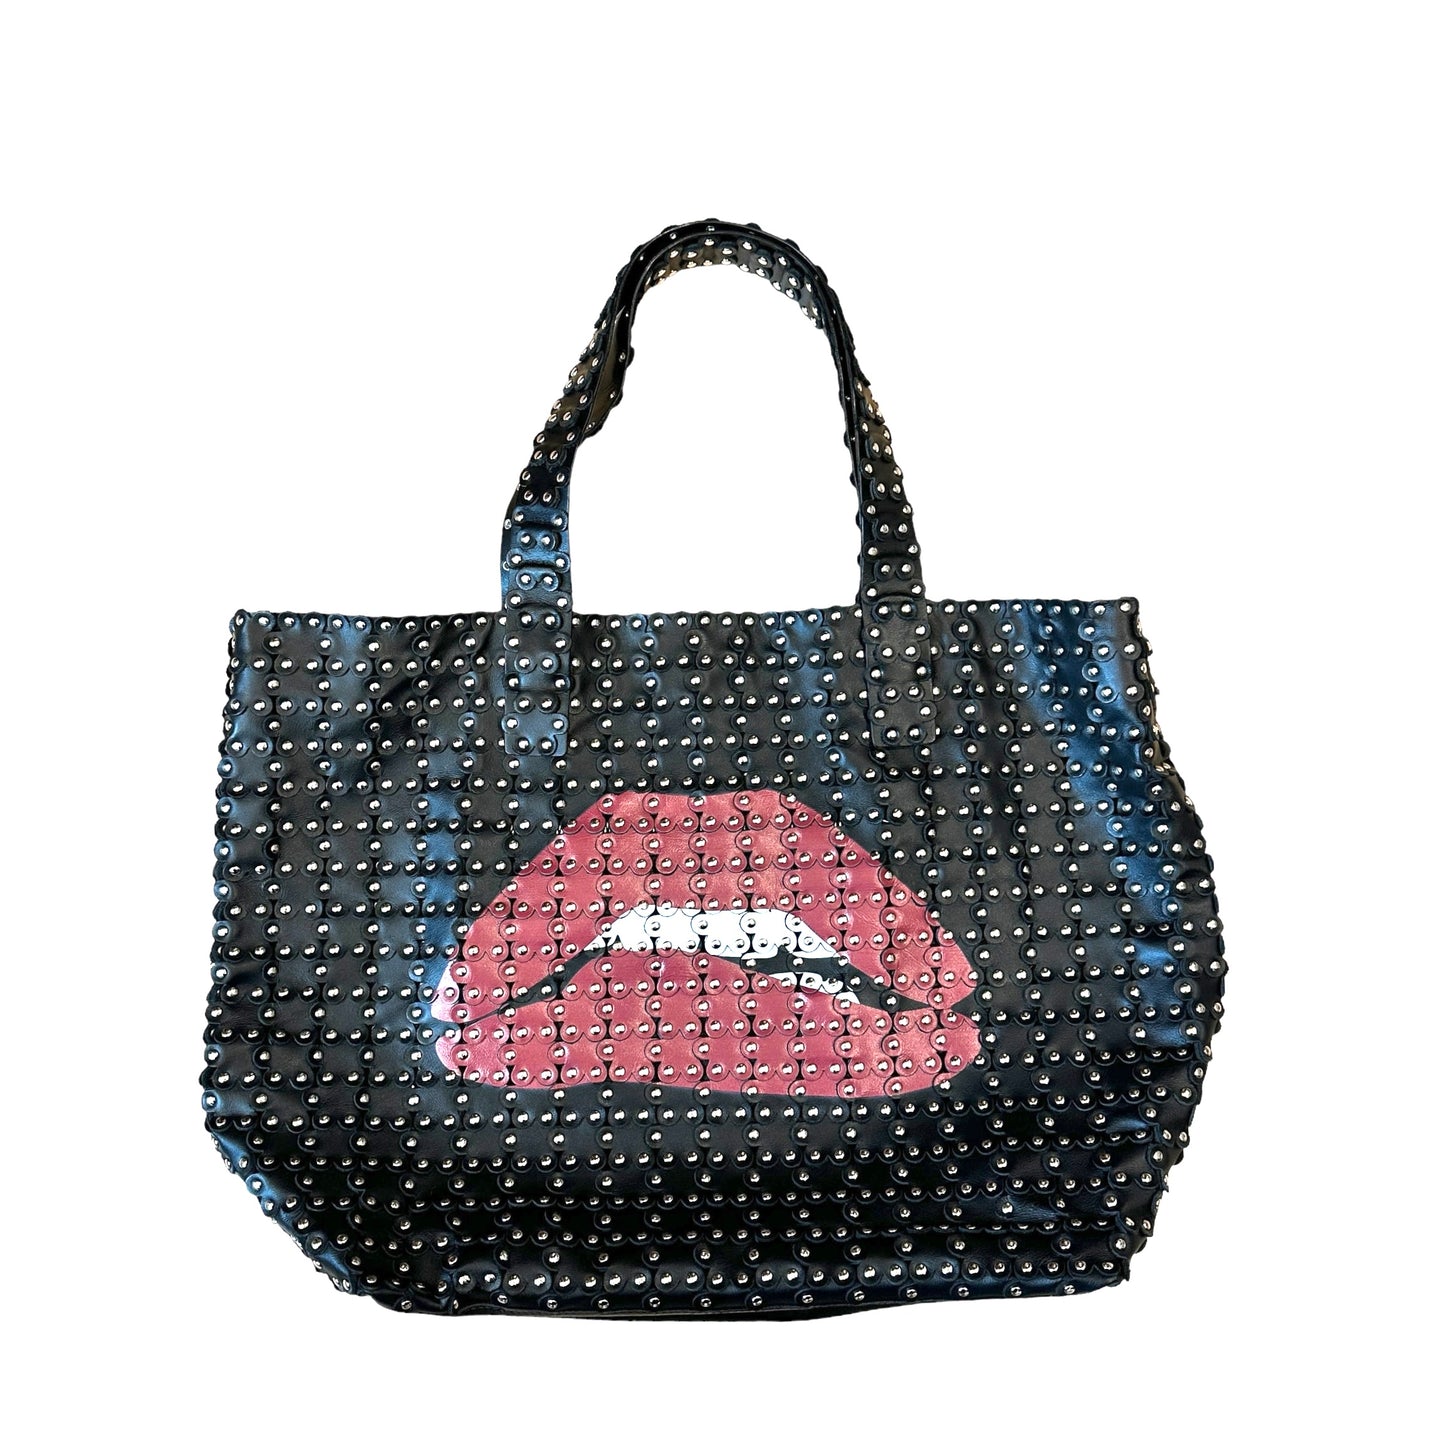 Lips Studded Leather Tote